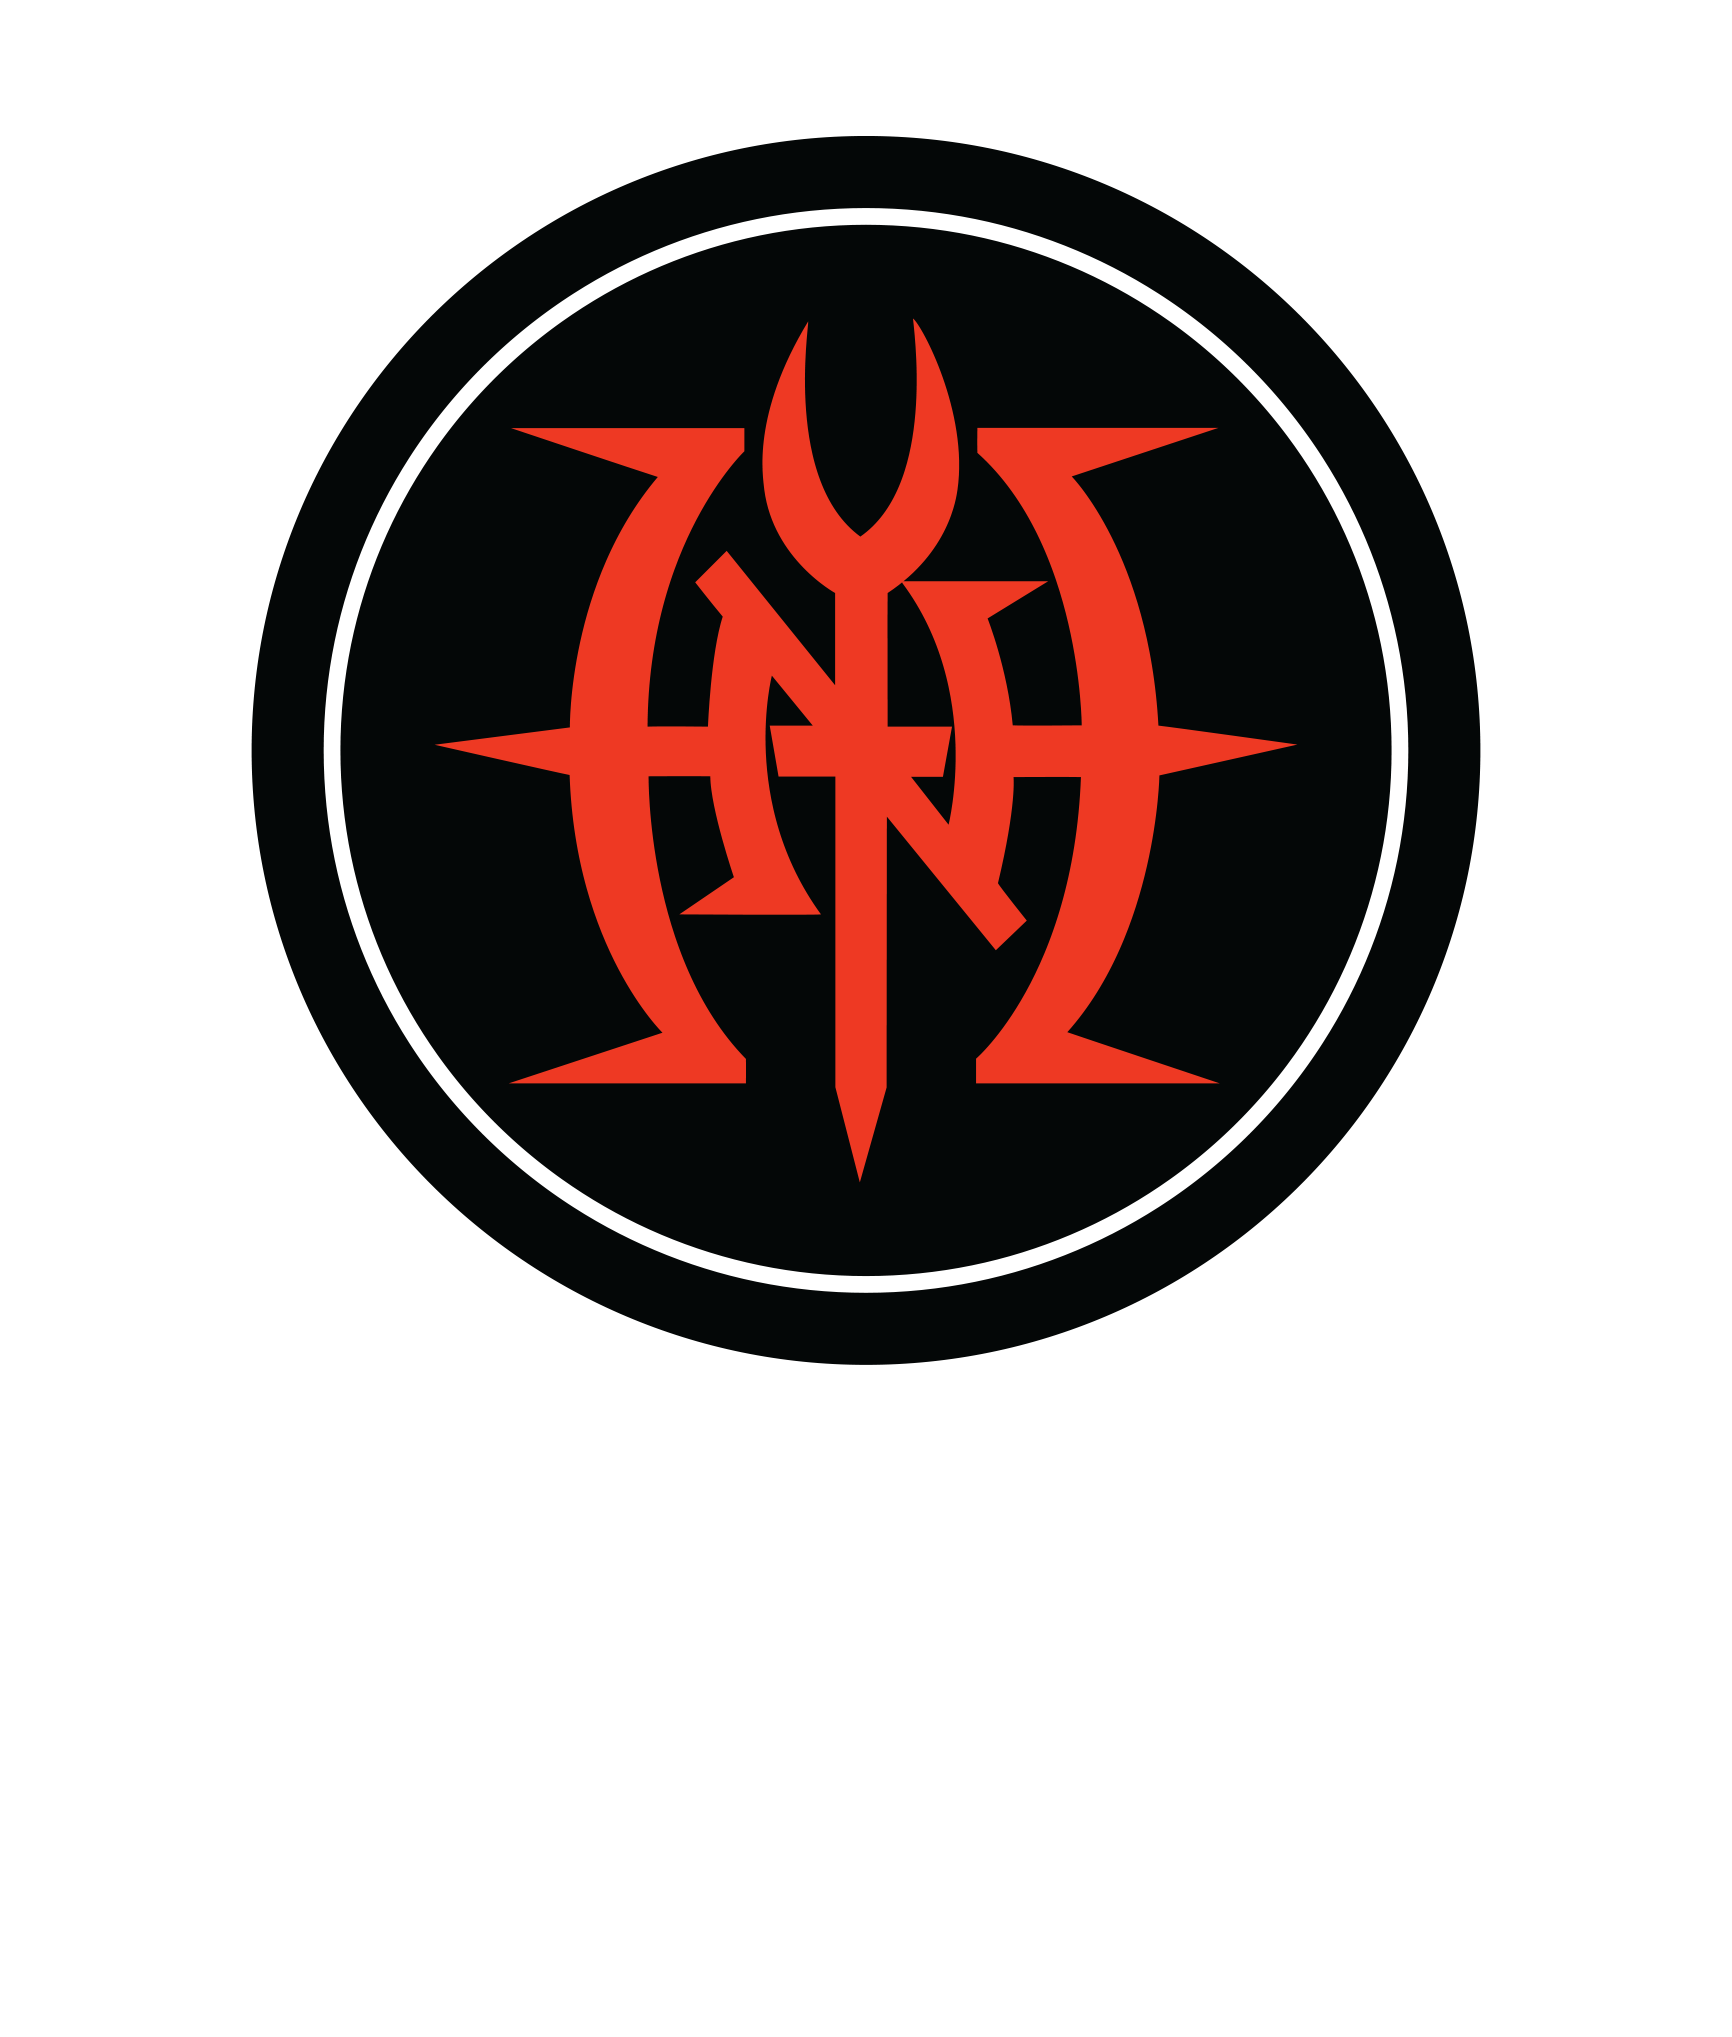 Heavy NYC | The Official Website for All Heavy Metal News in the NYC Area